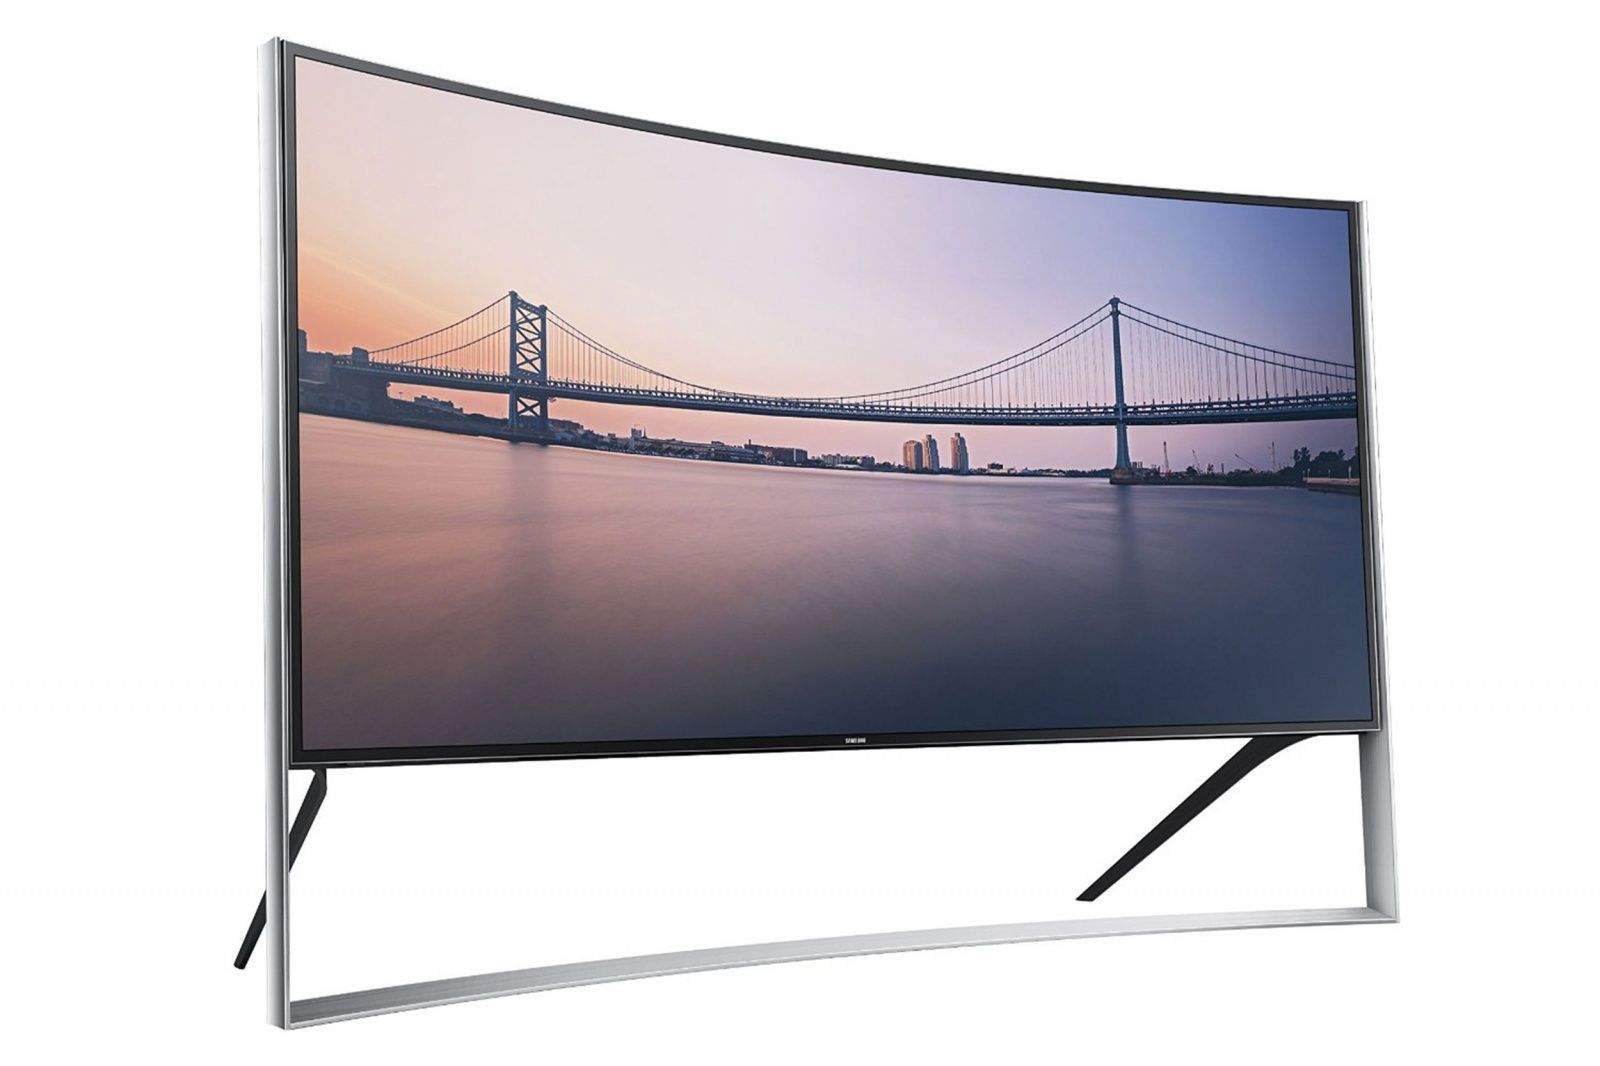 Screen grab of Samsung UN105S9 Curved 105-Inch 4K Ultra HD 120Hz 3D Smart LED TV: Amazon